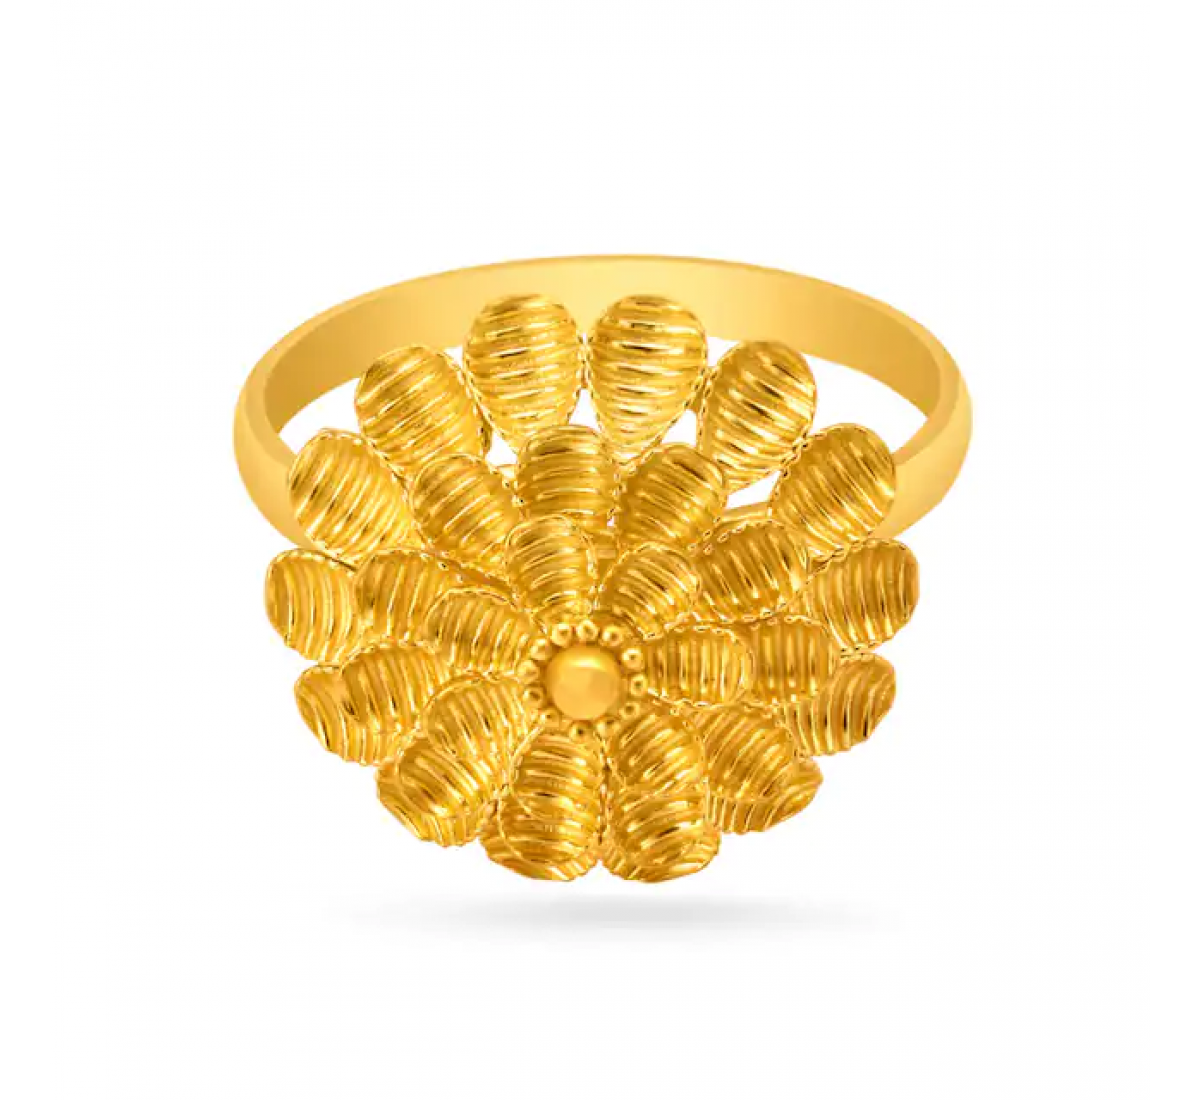 Buy quality Gold Flower Shape Single Stone Ring in Ahmedabad